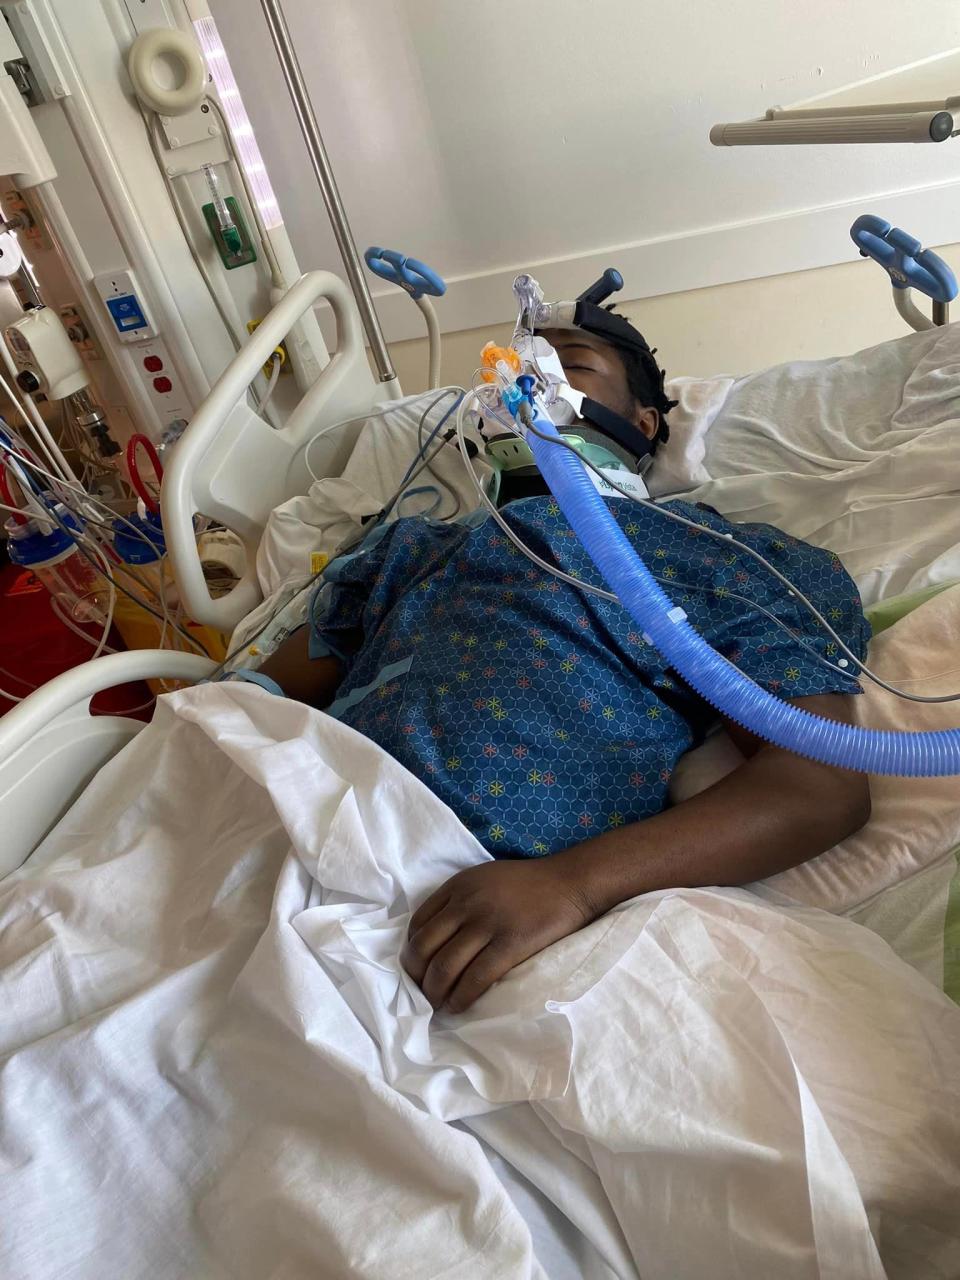 Damarion Allen, 15, was in the intensive care unit at Nationwide Children's Hospital for weeks after he was paralyzed from the chest down following a May 7 fight with another teen at the Franklin County Juvenile Intervention Center. After the fight, guards dragged Allen back to his cell by his arms.